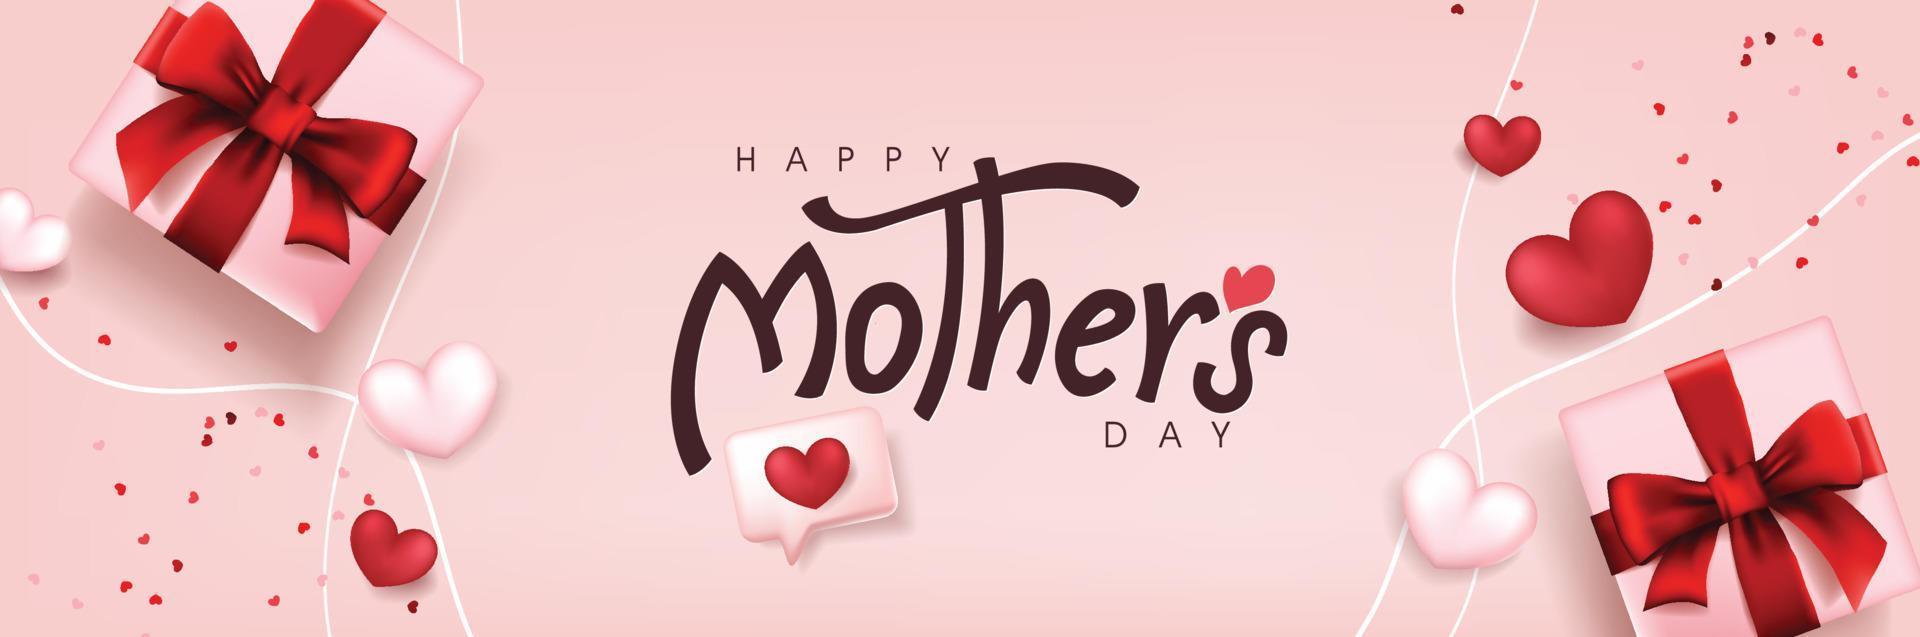 Mothers day poster banner background layout with gift box and heart shaped balloons vector